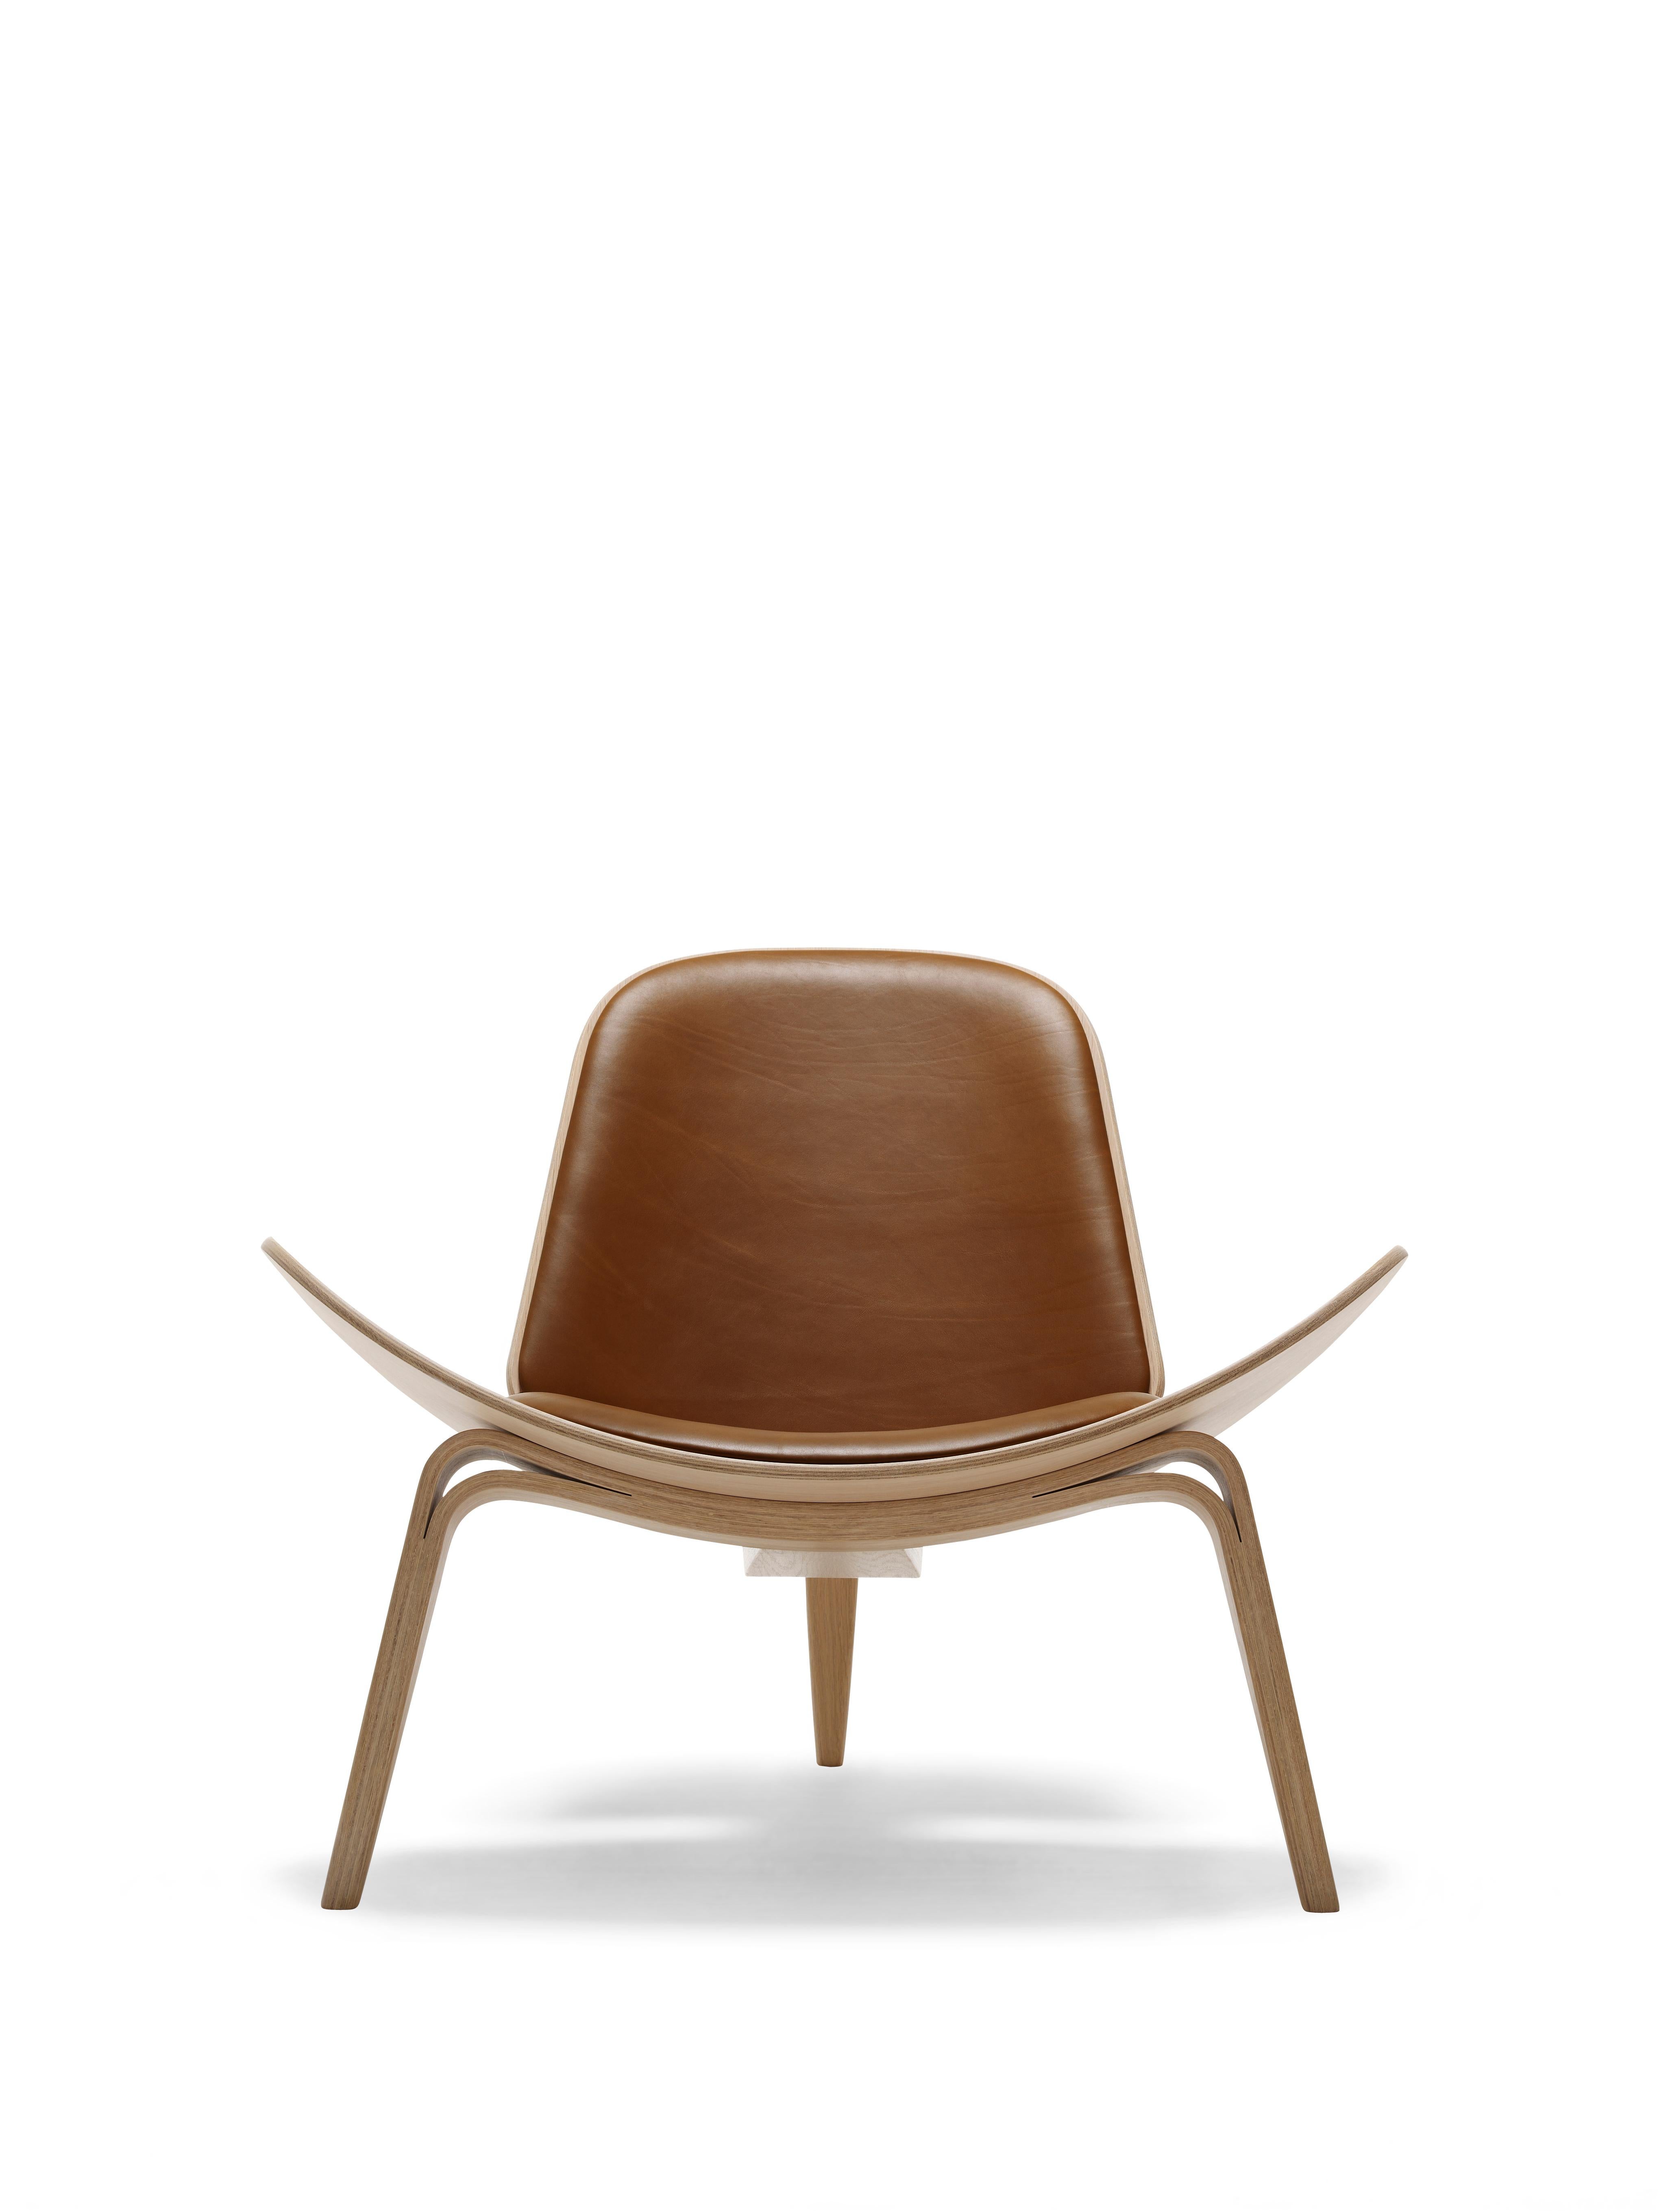 Brown (Sif 95) CH07 Shell Chair in Oak White Oil with Leather Seat by Hans J. Wegner